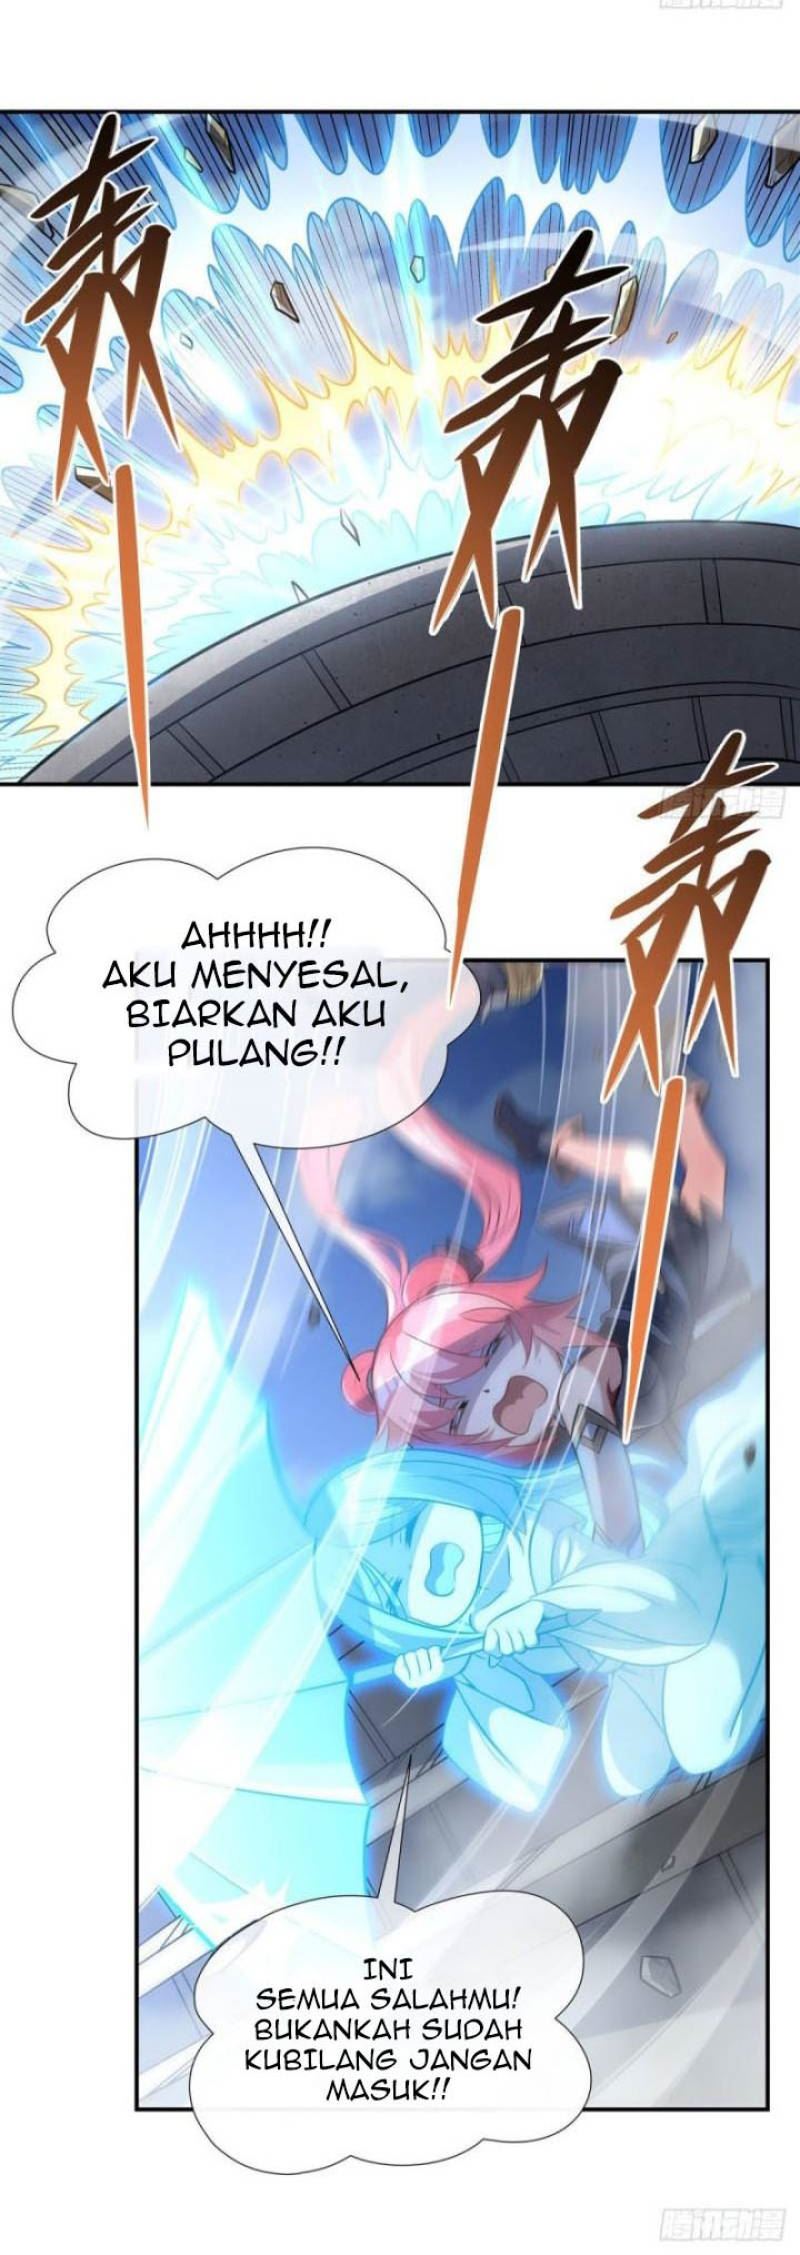 Dilarang COPAS - situs resmi www.mangacanblog.com - Komik my female apprentices are all big shots from the future 082 - chapter 82 83 Indonesia my female apprentices are all big shots from the future 082 - chapter 82 Terbaru 15|Baca Manga Komik Indonesia|Mangacan